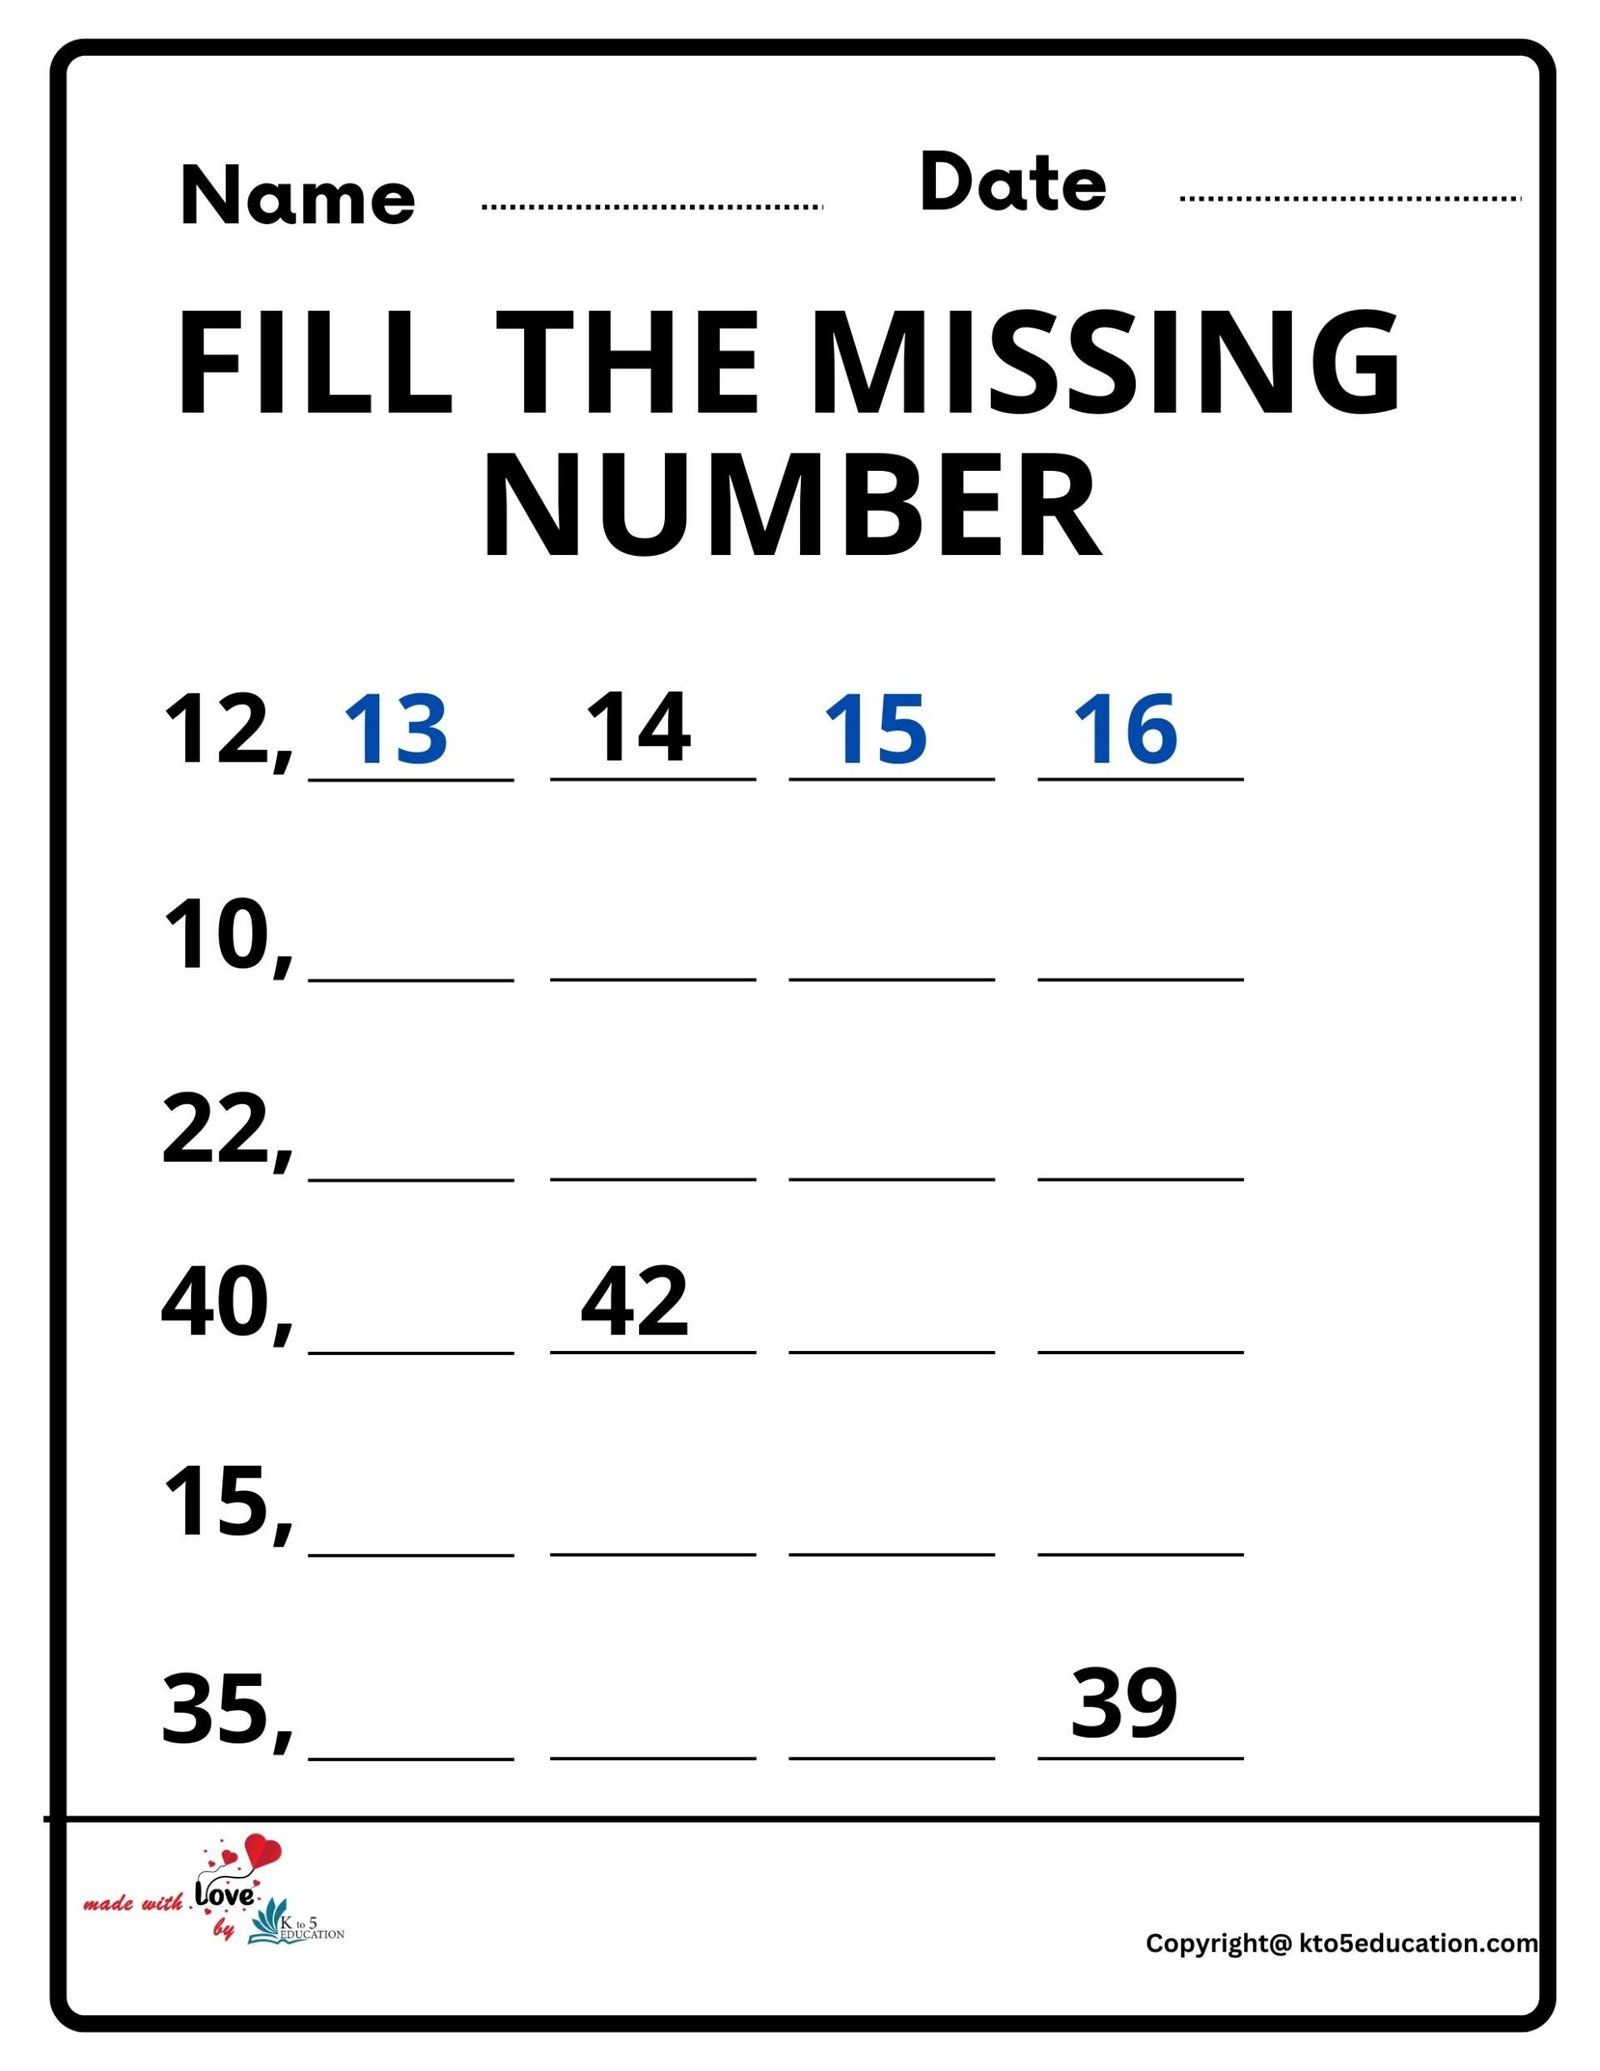 math-worksheets-3rd-grade-ordering-numbers-to-10000